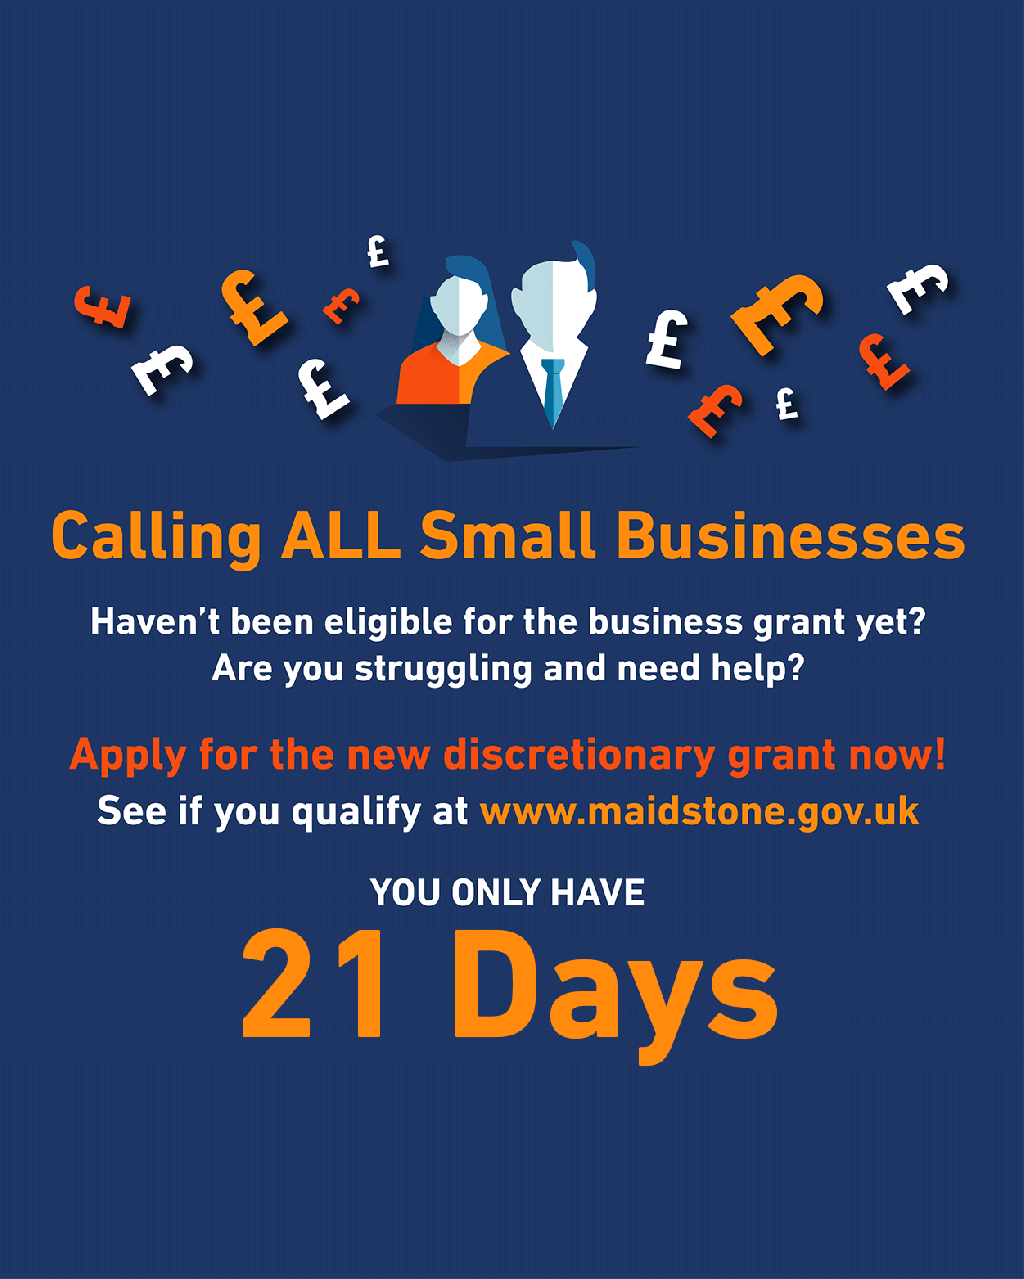 Don’t delay - apply today for business grant says MBC 